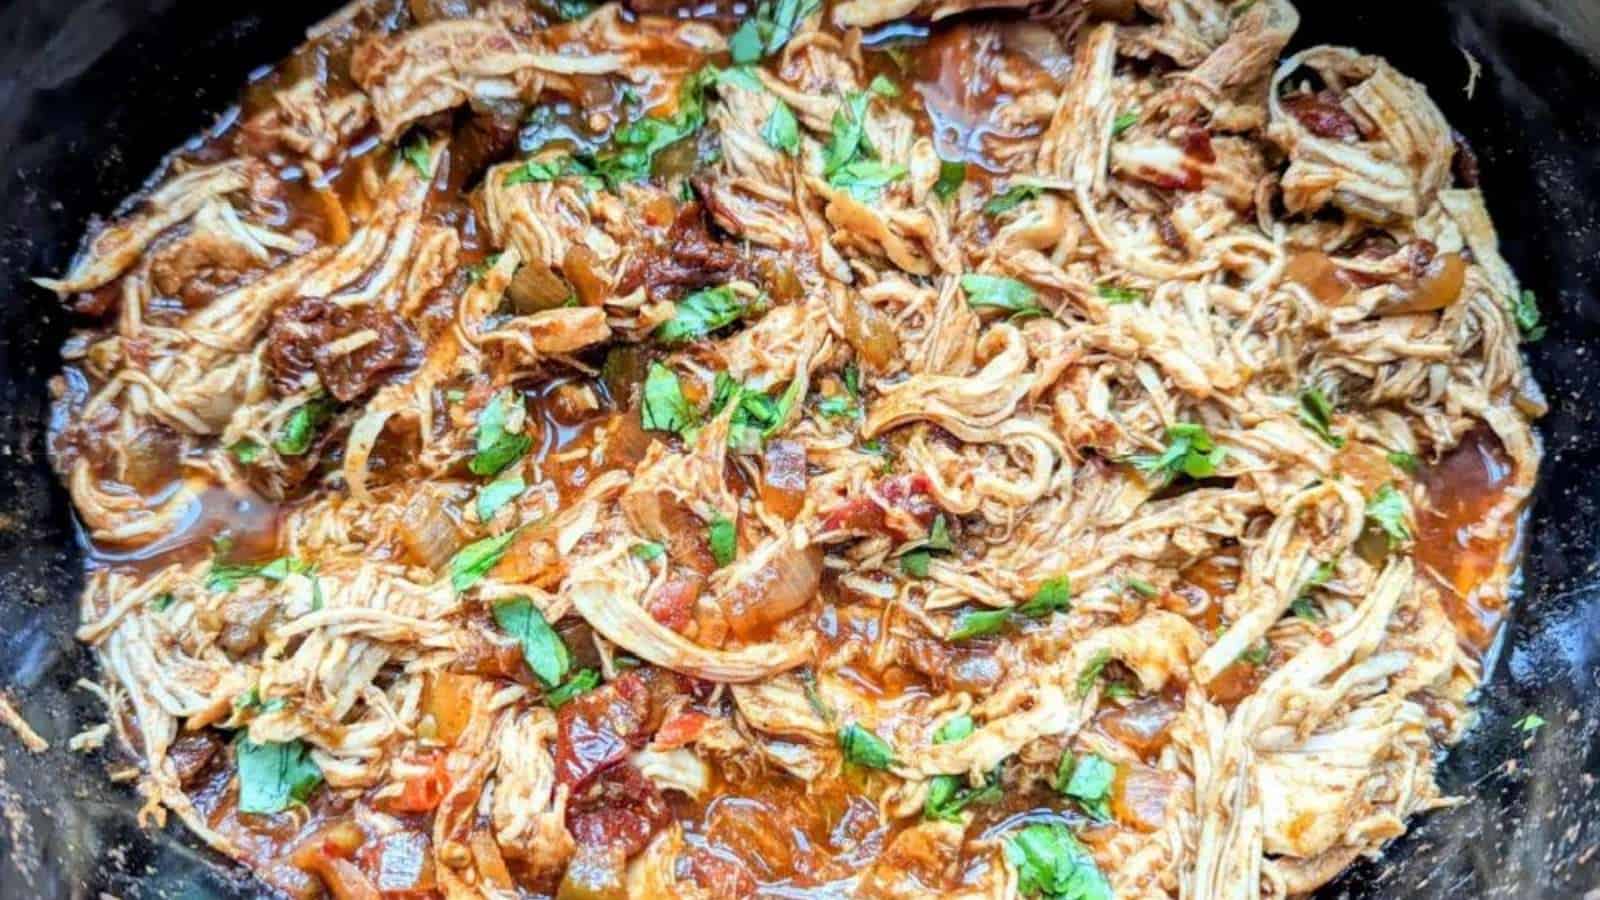 Shredded chicken in a slow cooker.